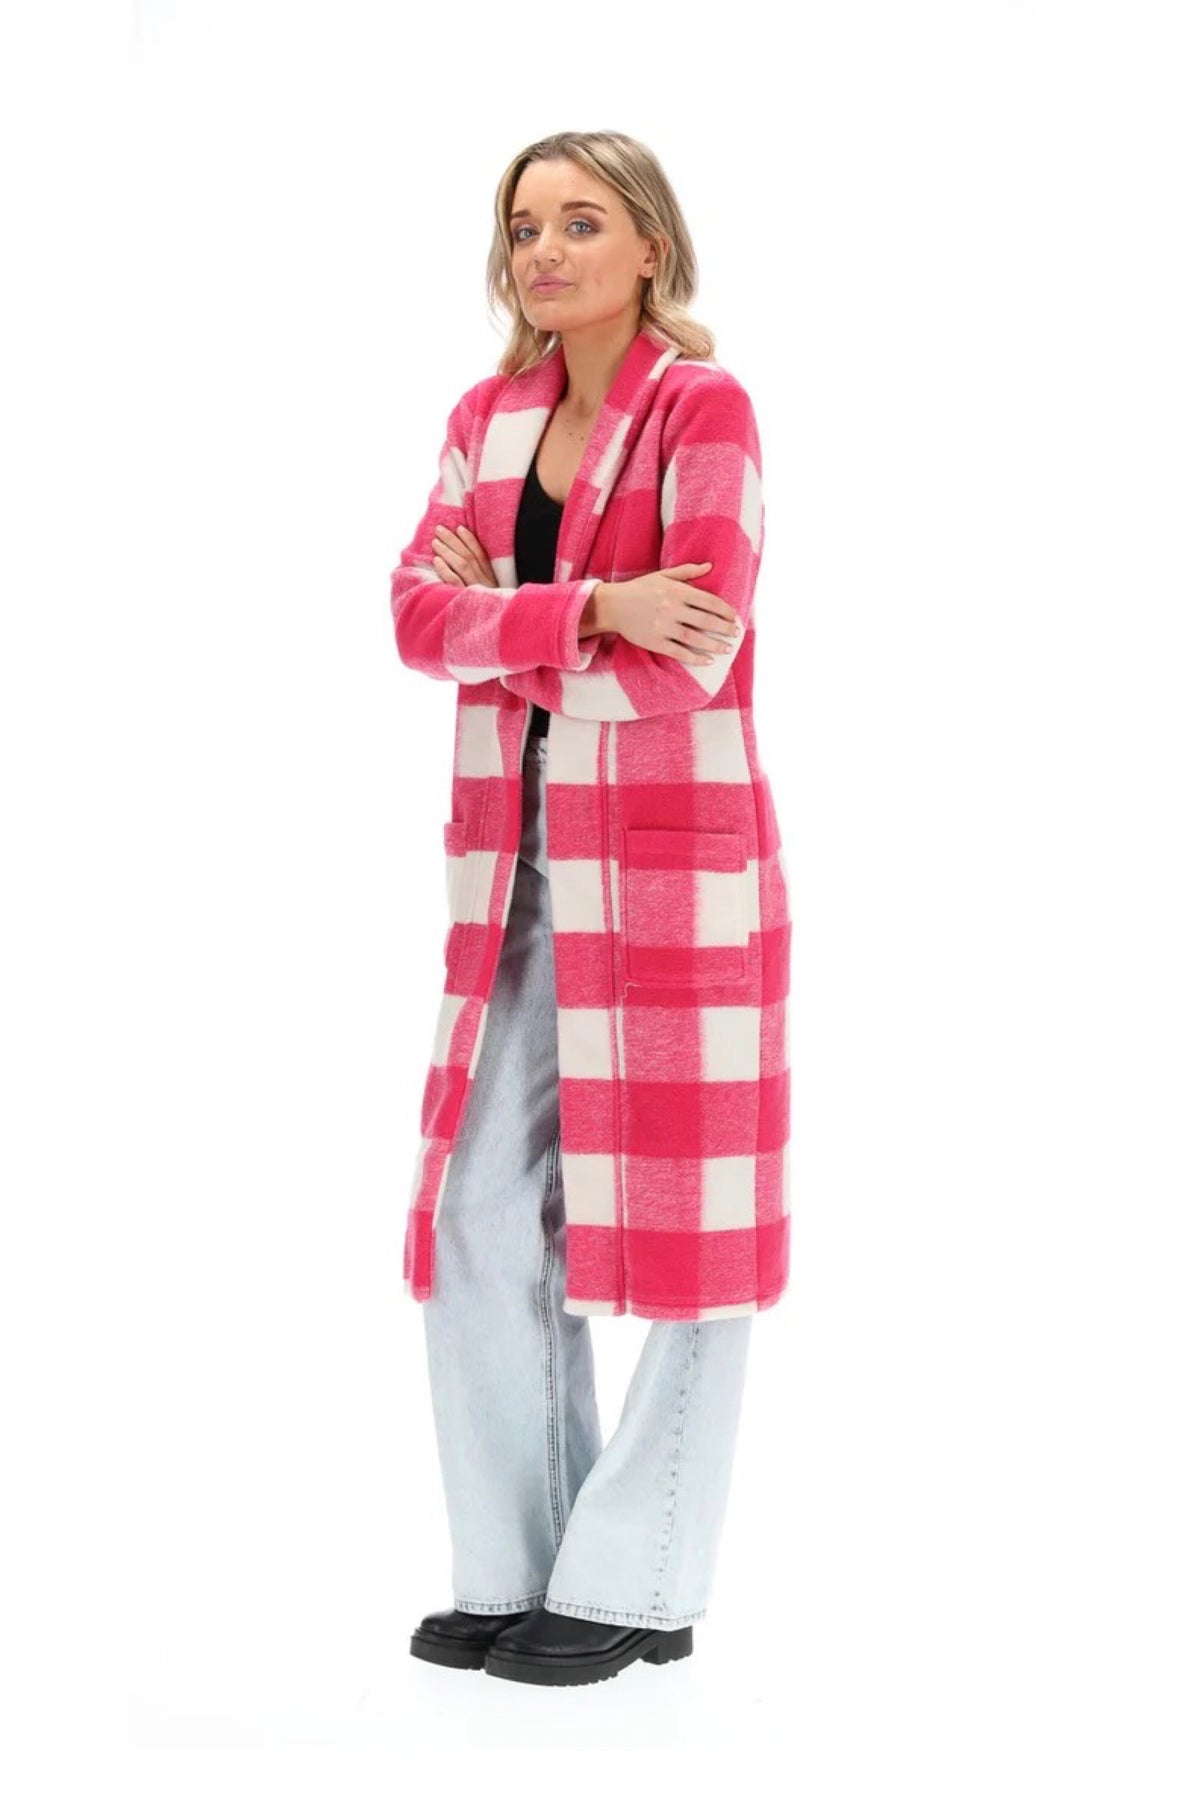 Bree Cardigan Pink And White Check